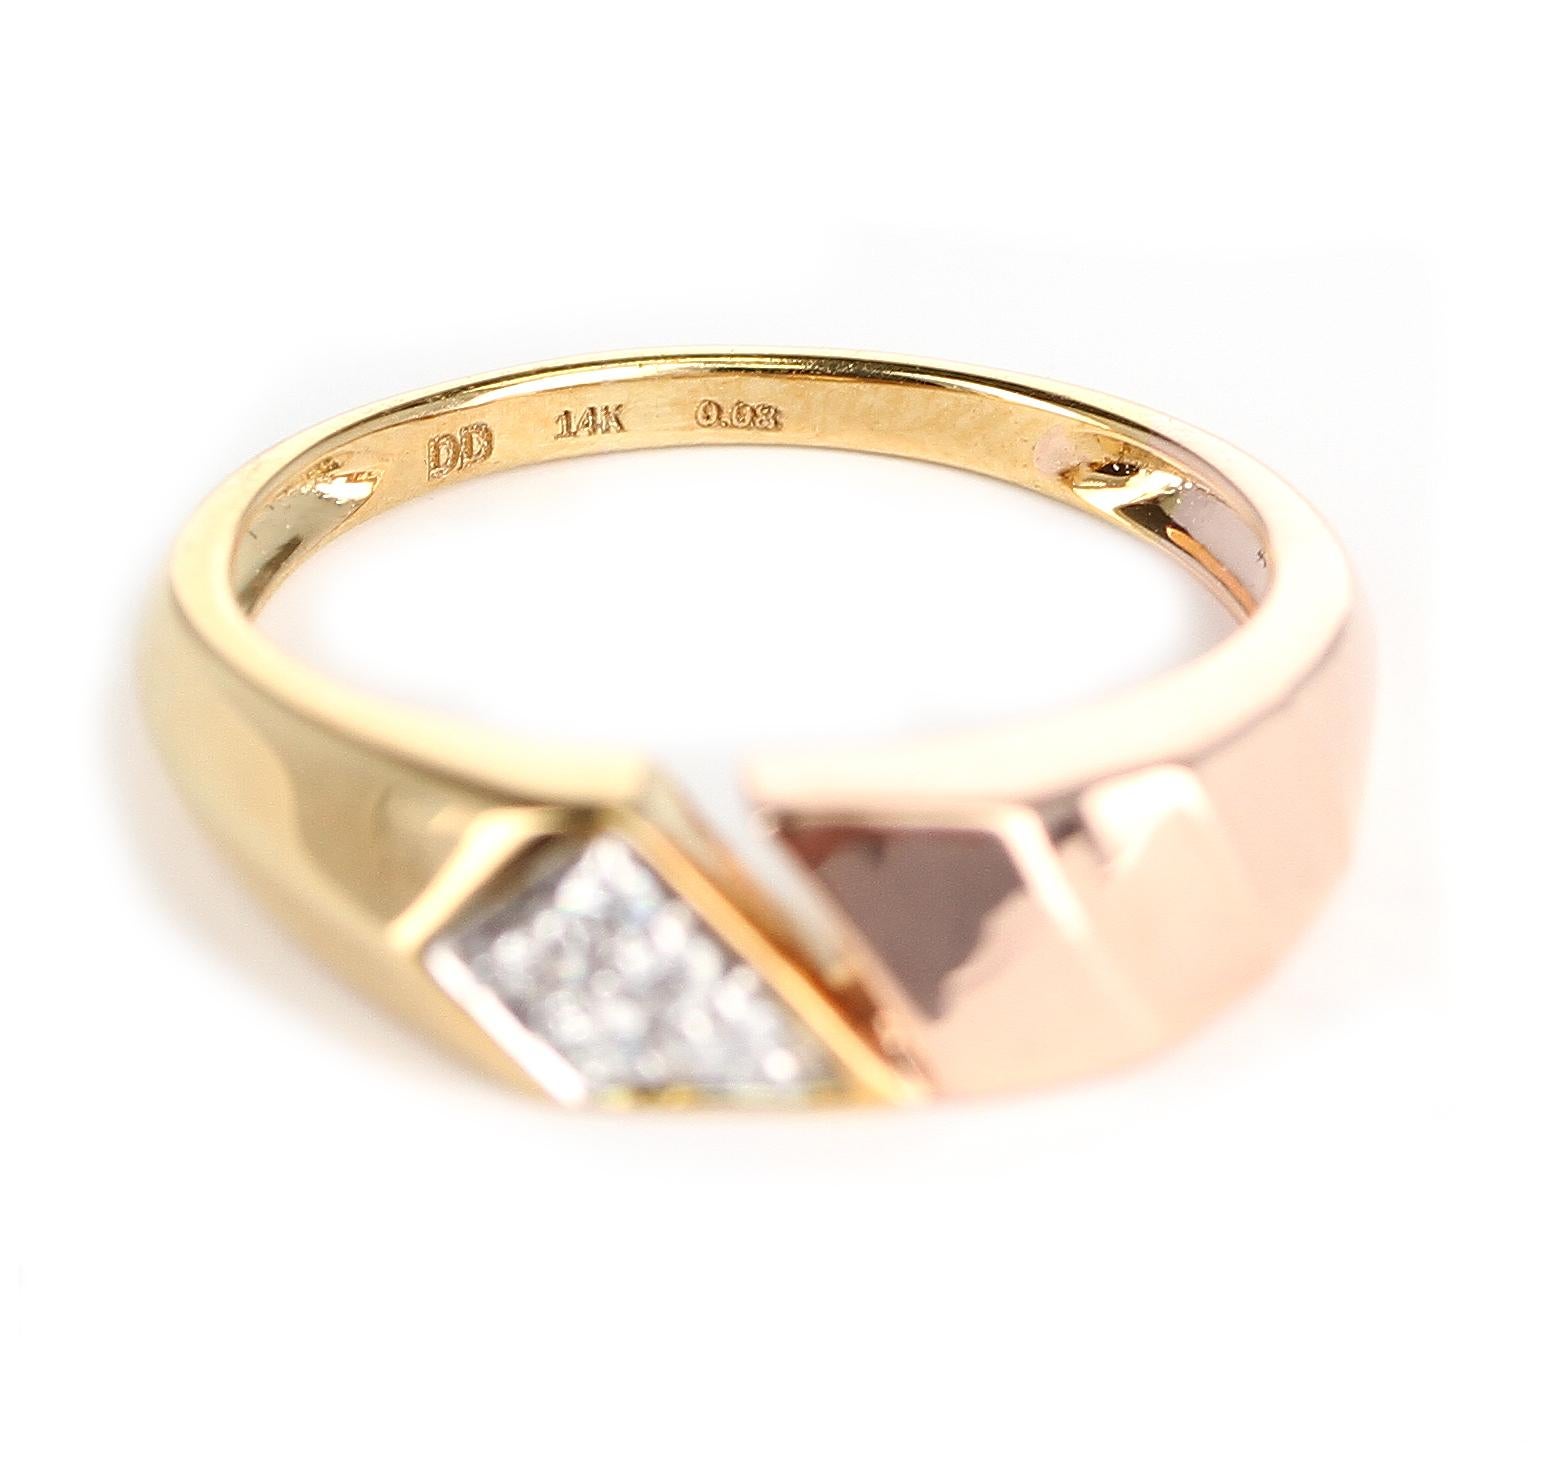 Round Cut Chic Open Two-Tone Yellow and Rose Gold 14 Karat Diamond Ring